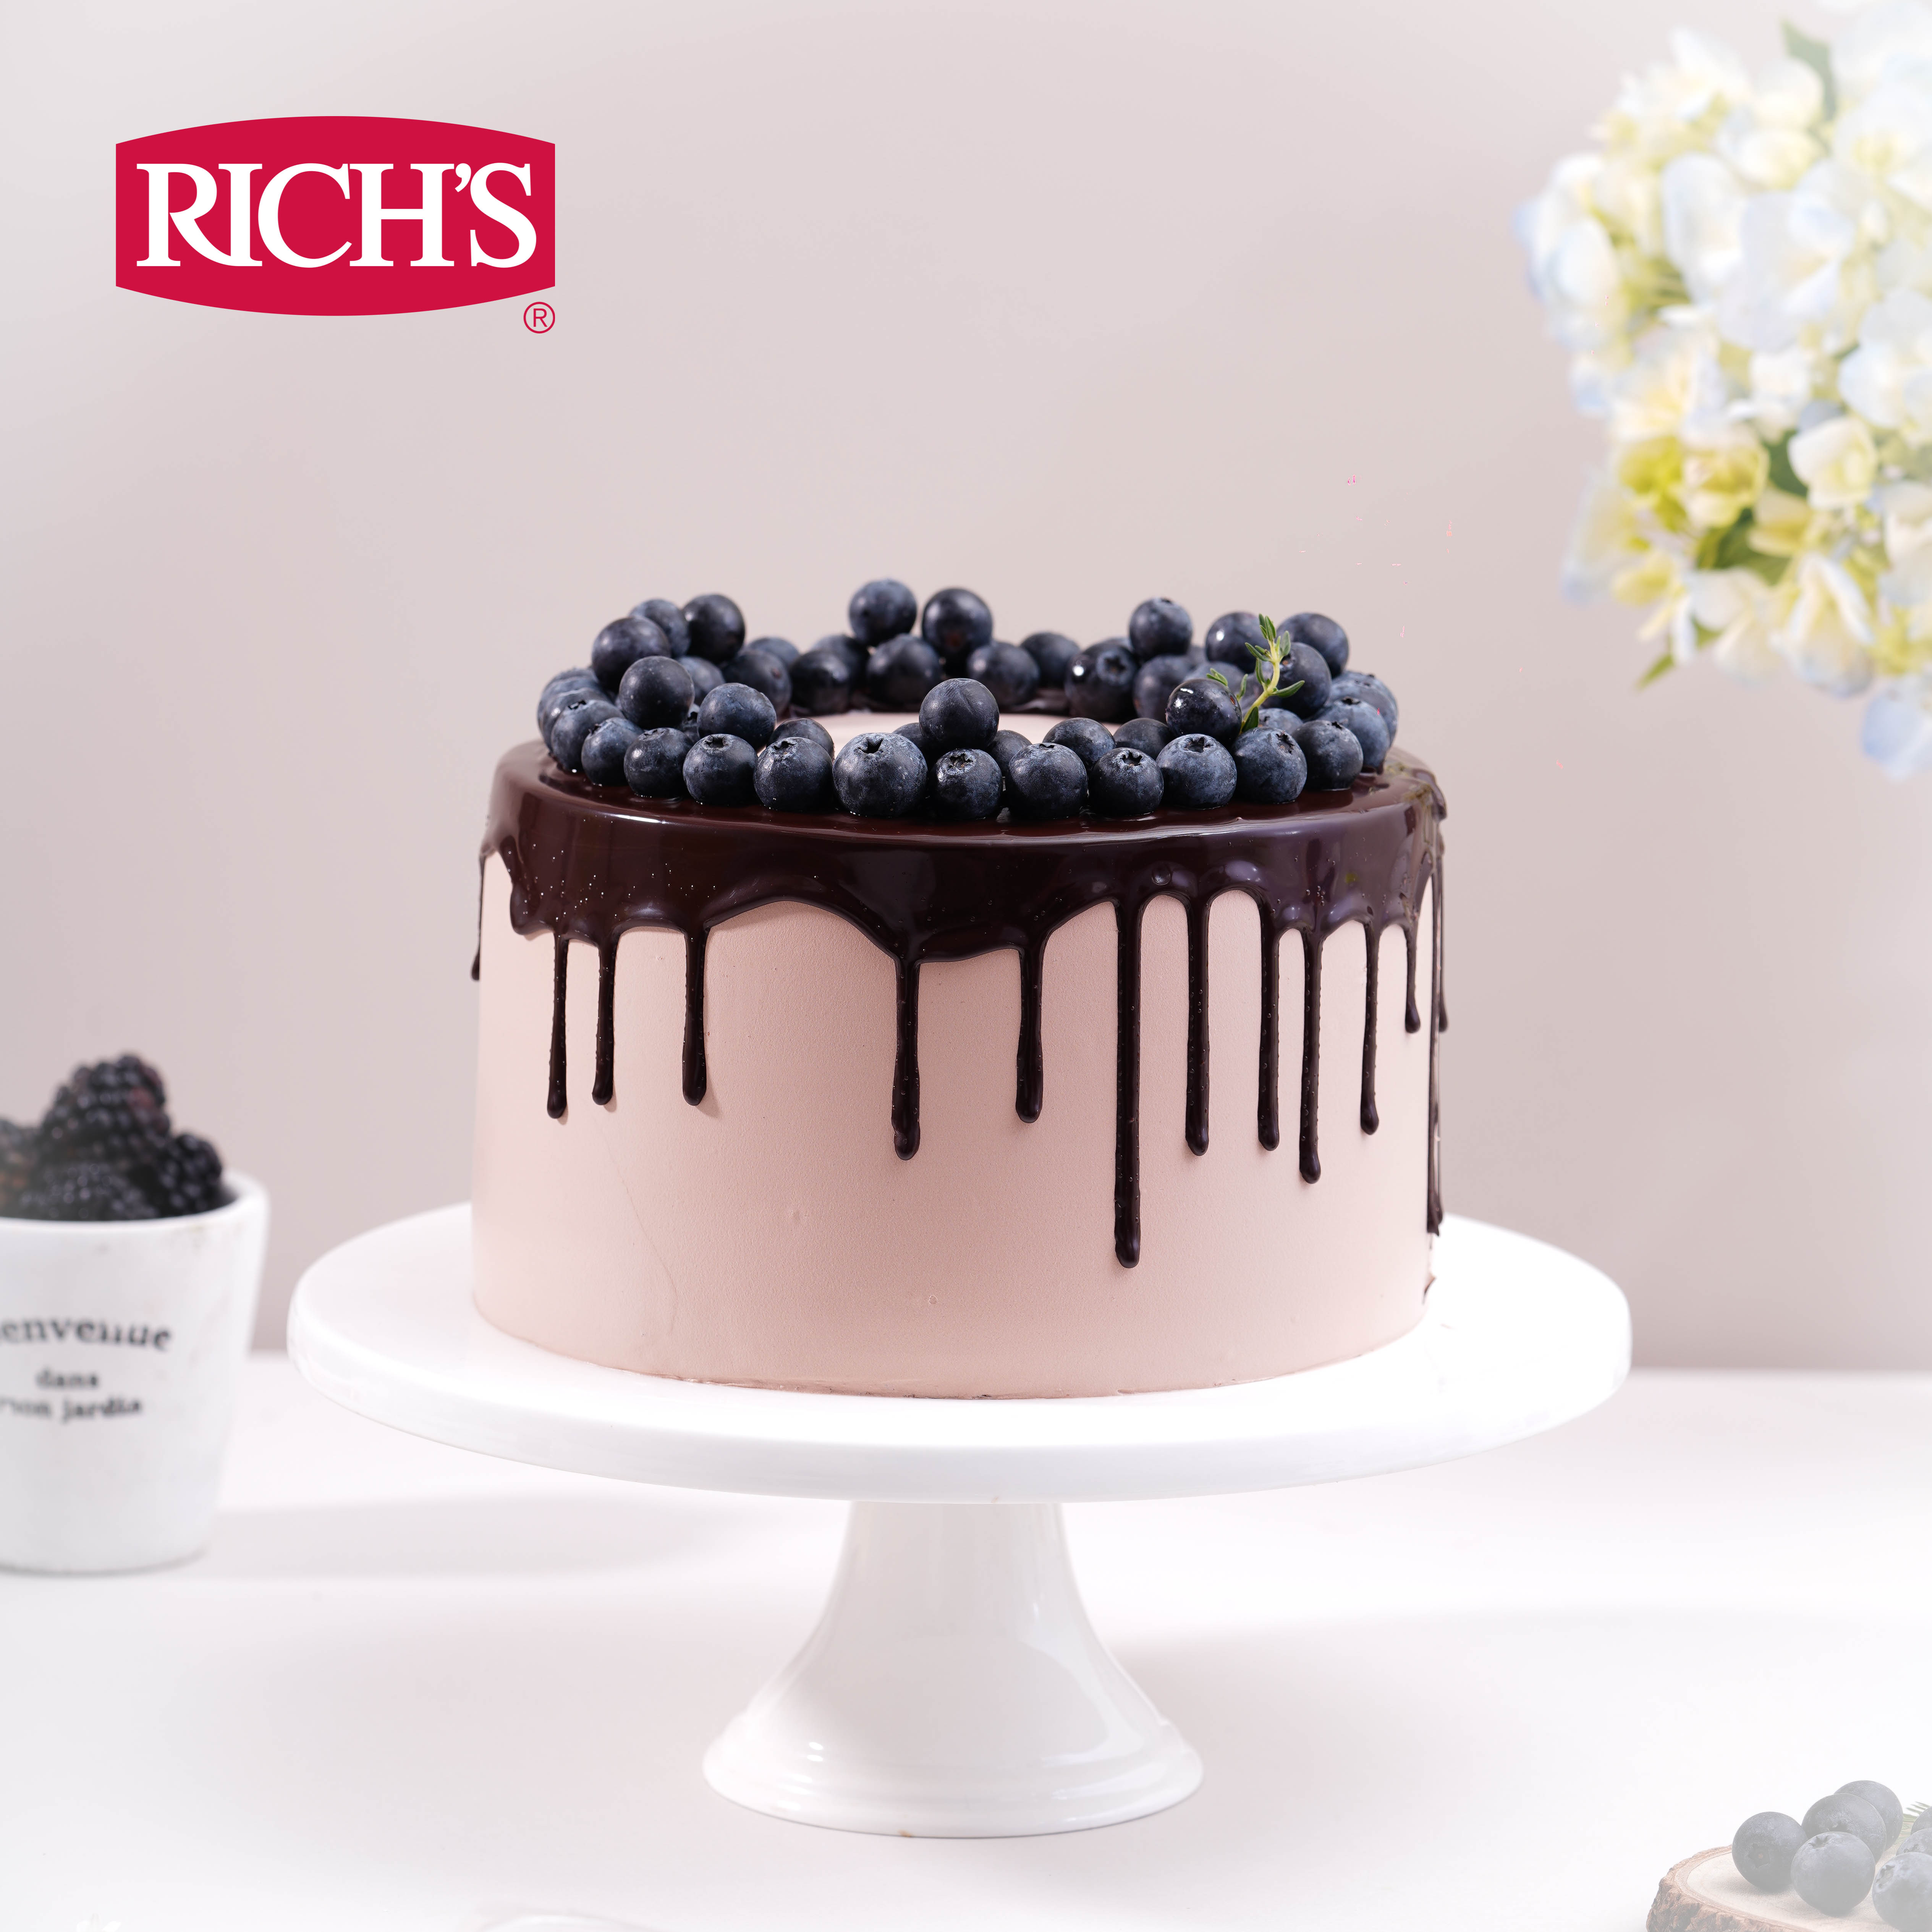 Explore creative ways to chocolate cake to decorate for any occasion